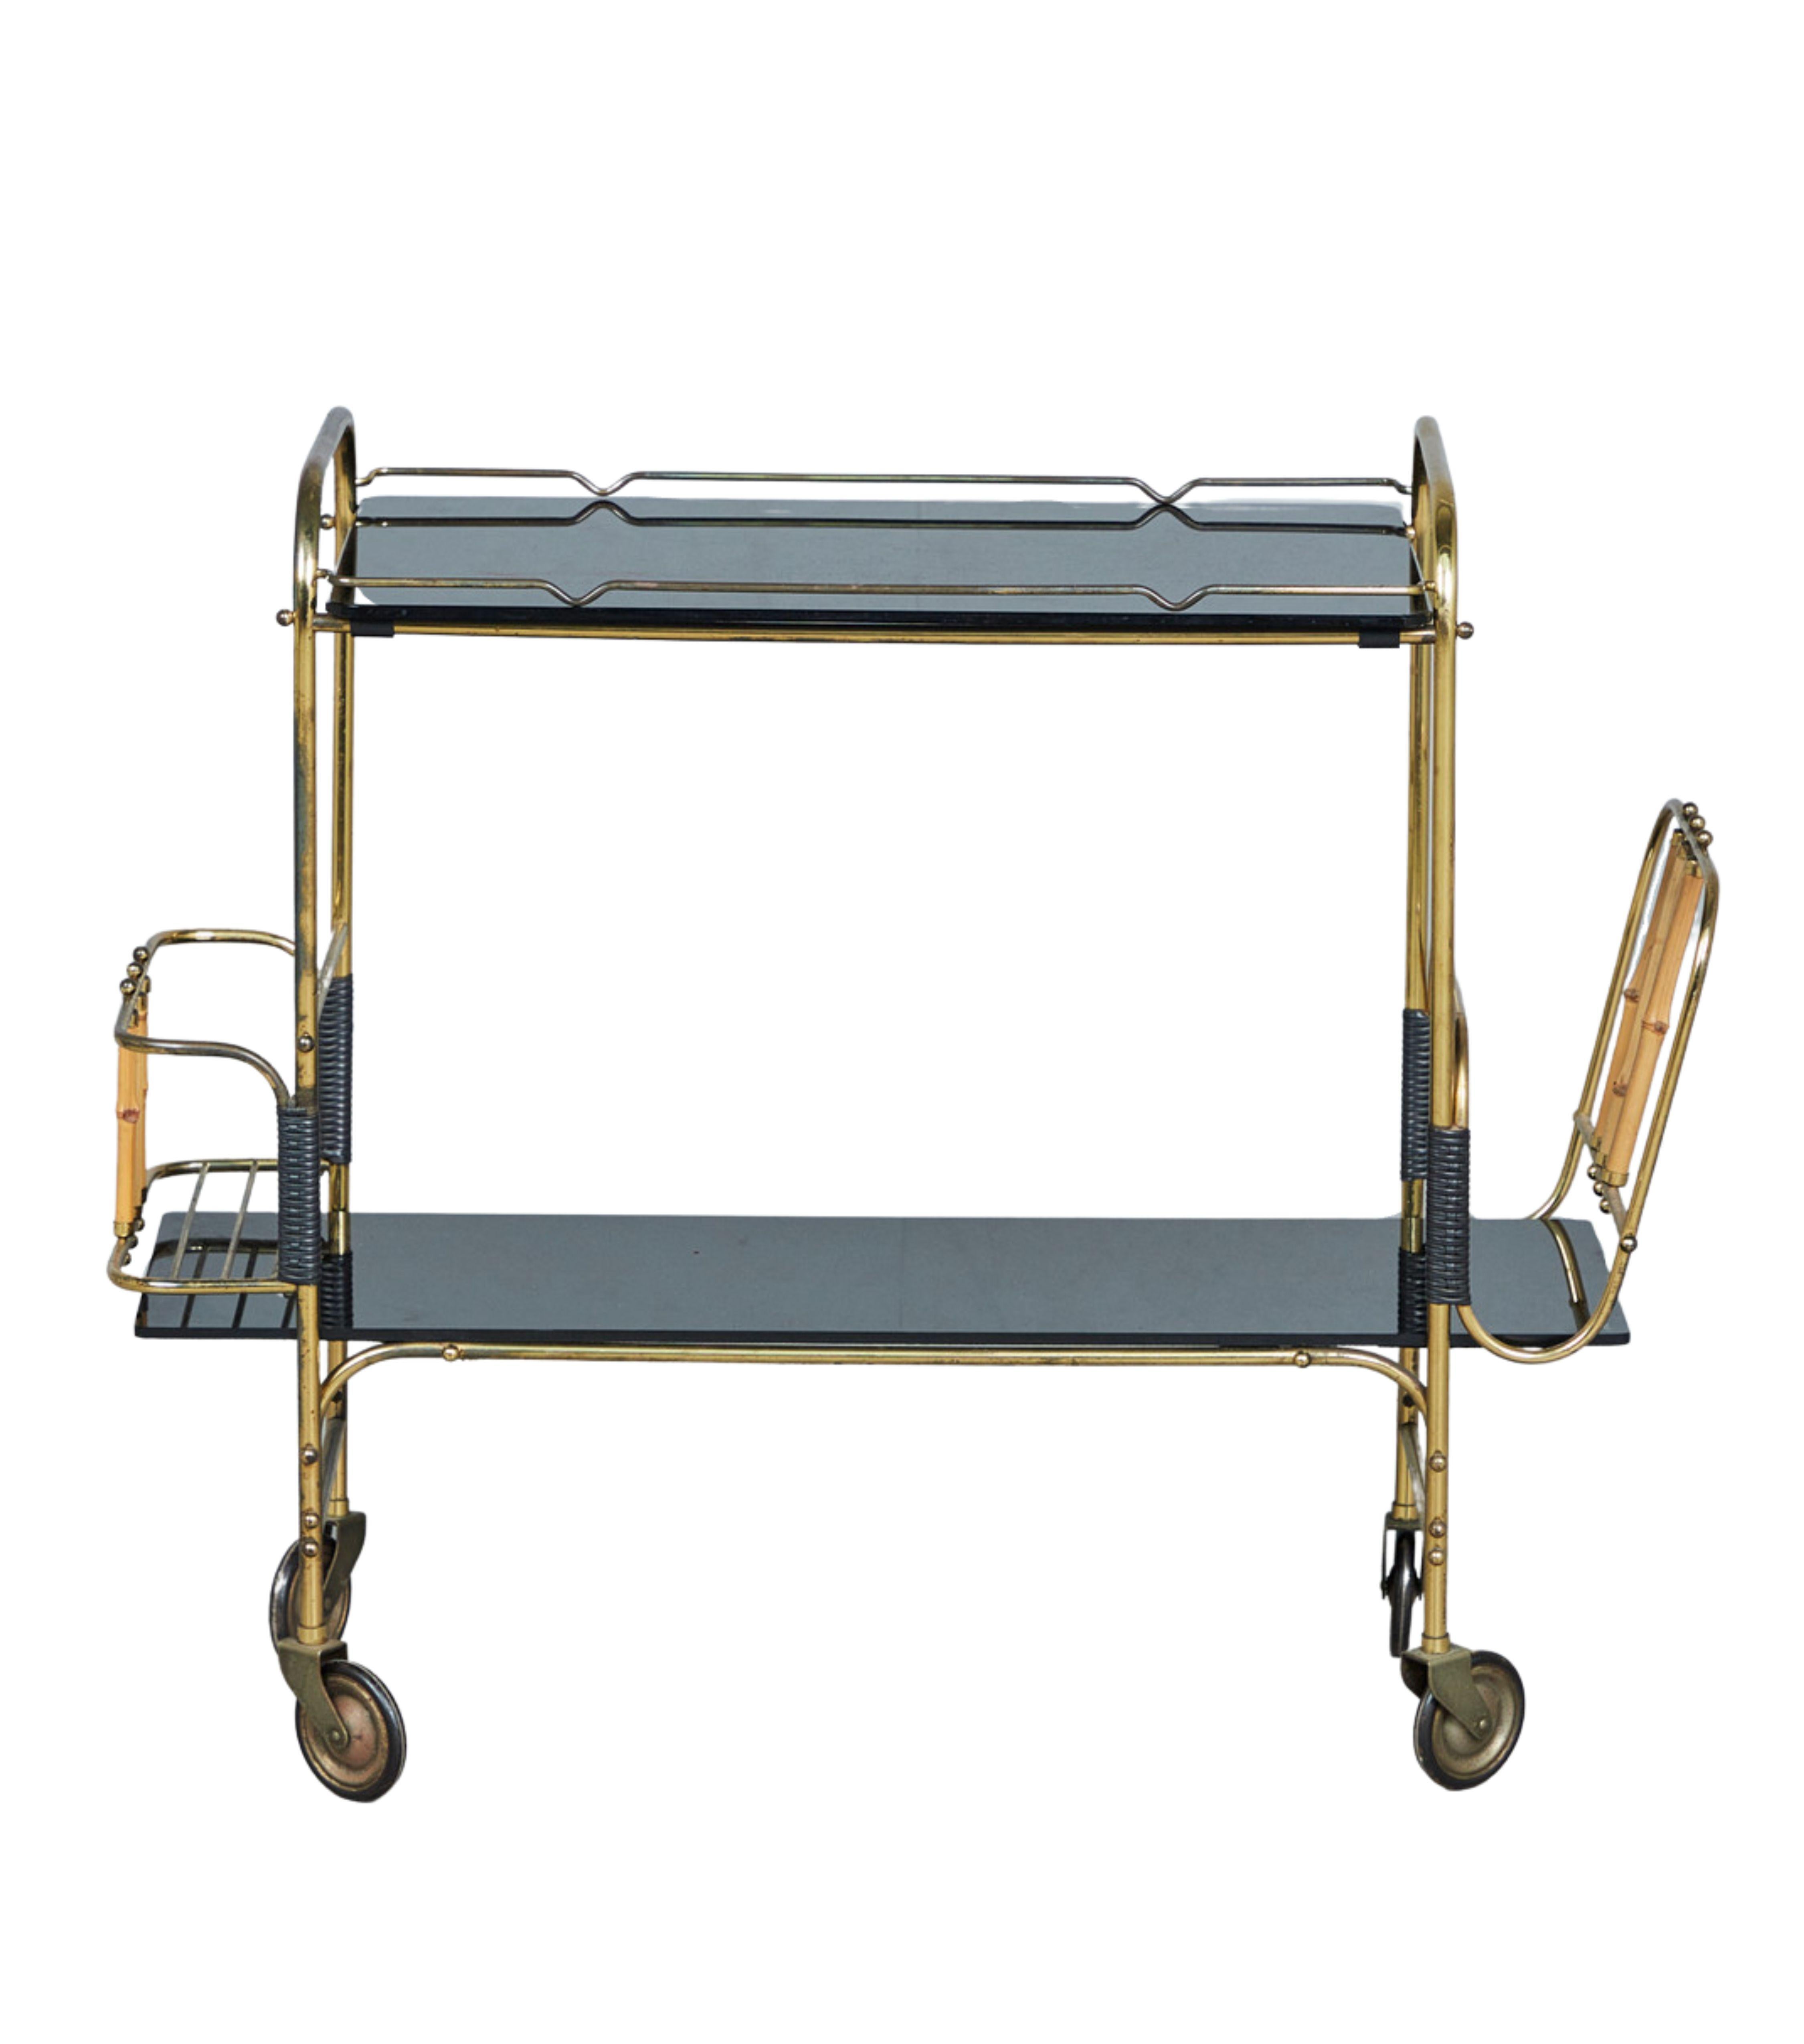 This German bar serving trolley from the 1950s made of metal coated in brass, with a unique design that includes bamboo cane braces. The trolley features two shelves made of black glass and is equipped with four wheels, a newspaper stand, and a